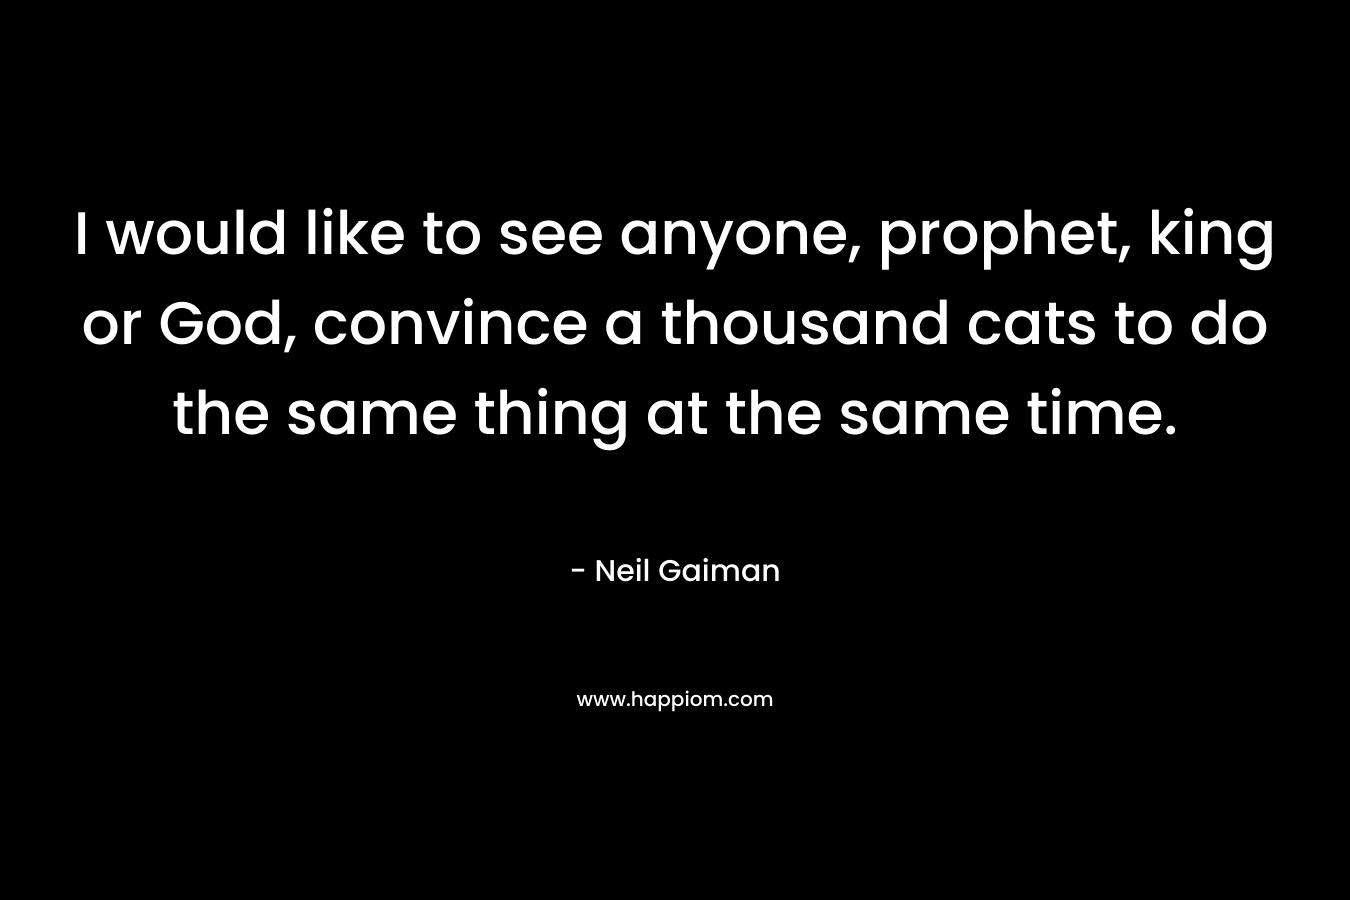 I would like to see anyone, prophet, king or God, convince a thousand cats to do the same thing at the same time. – Neil Gaiman